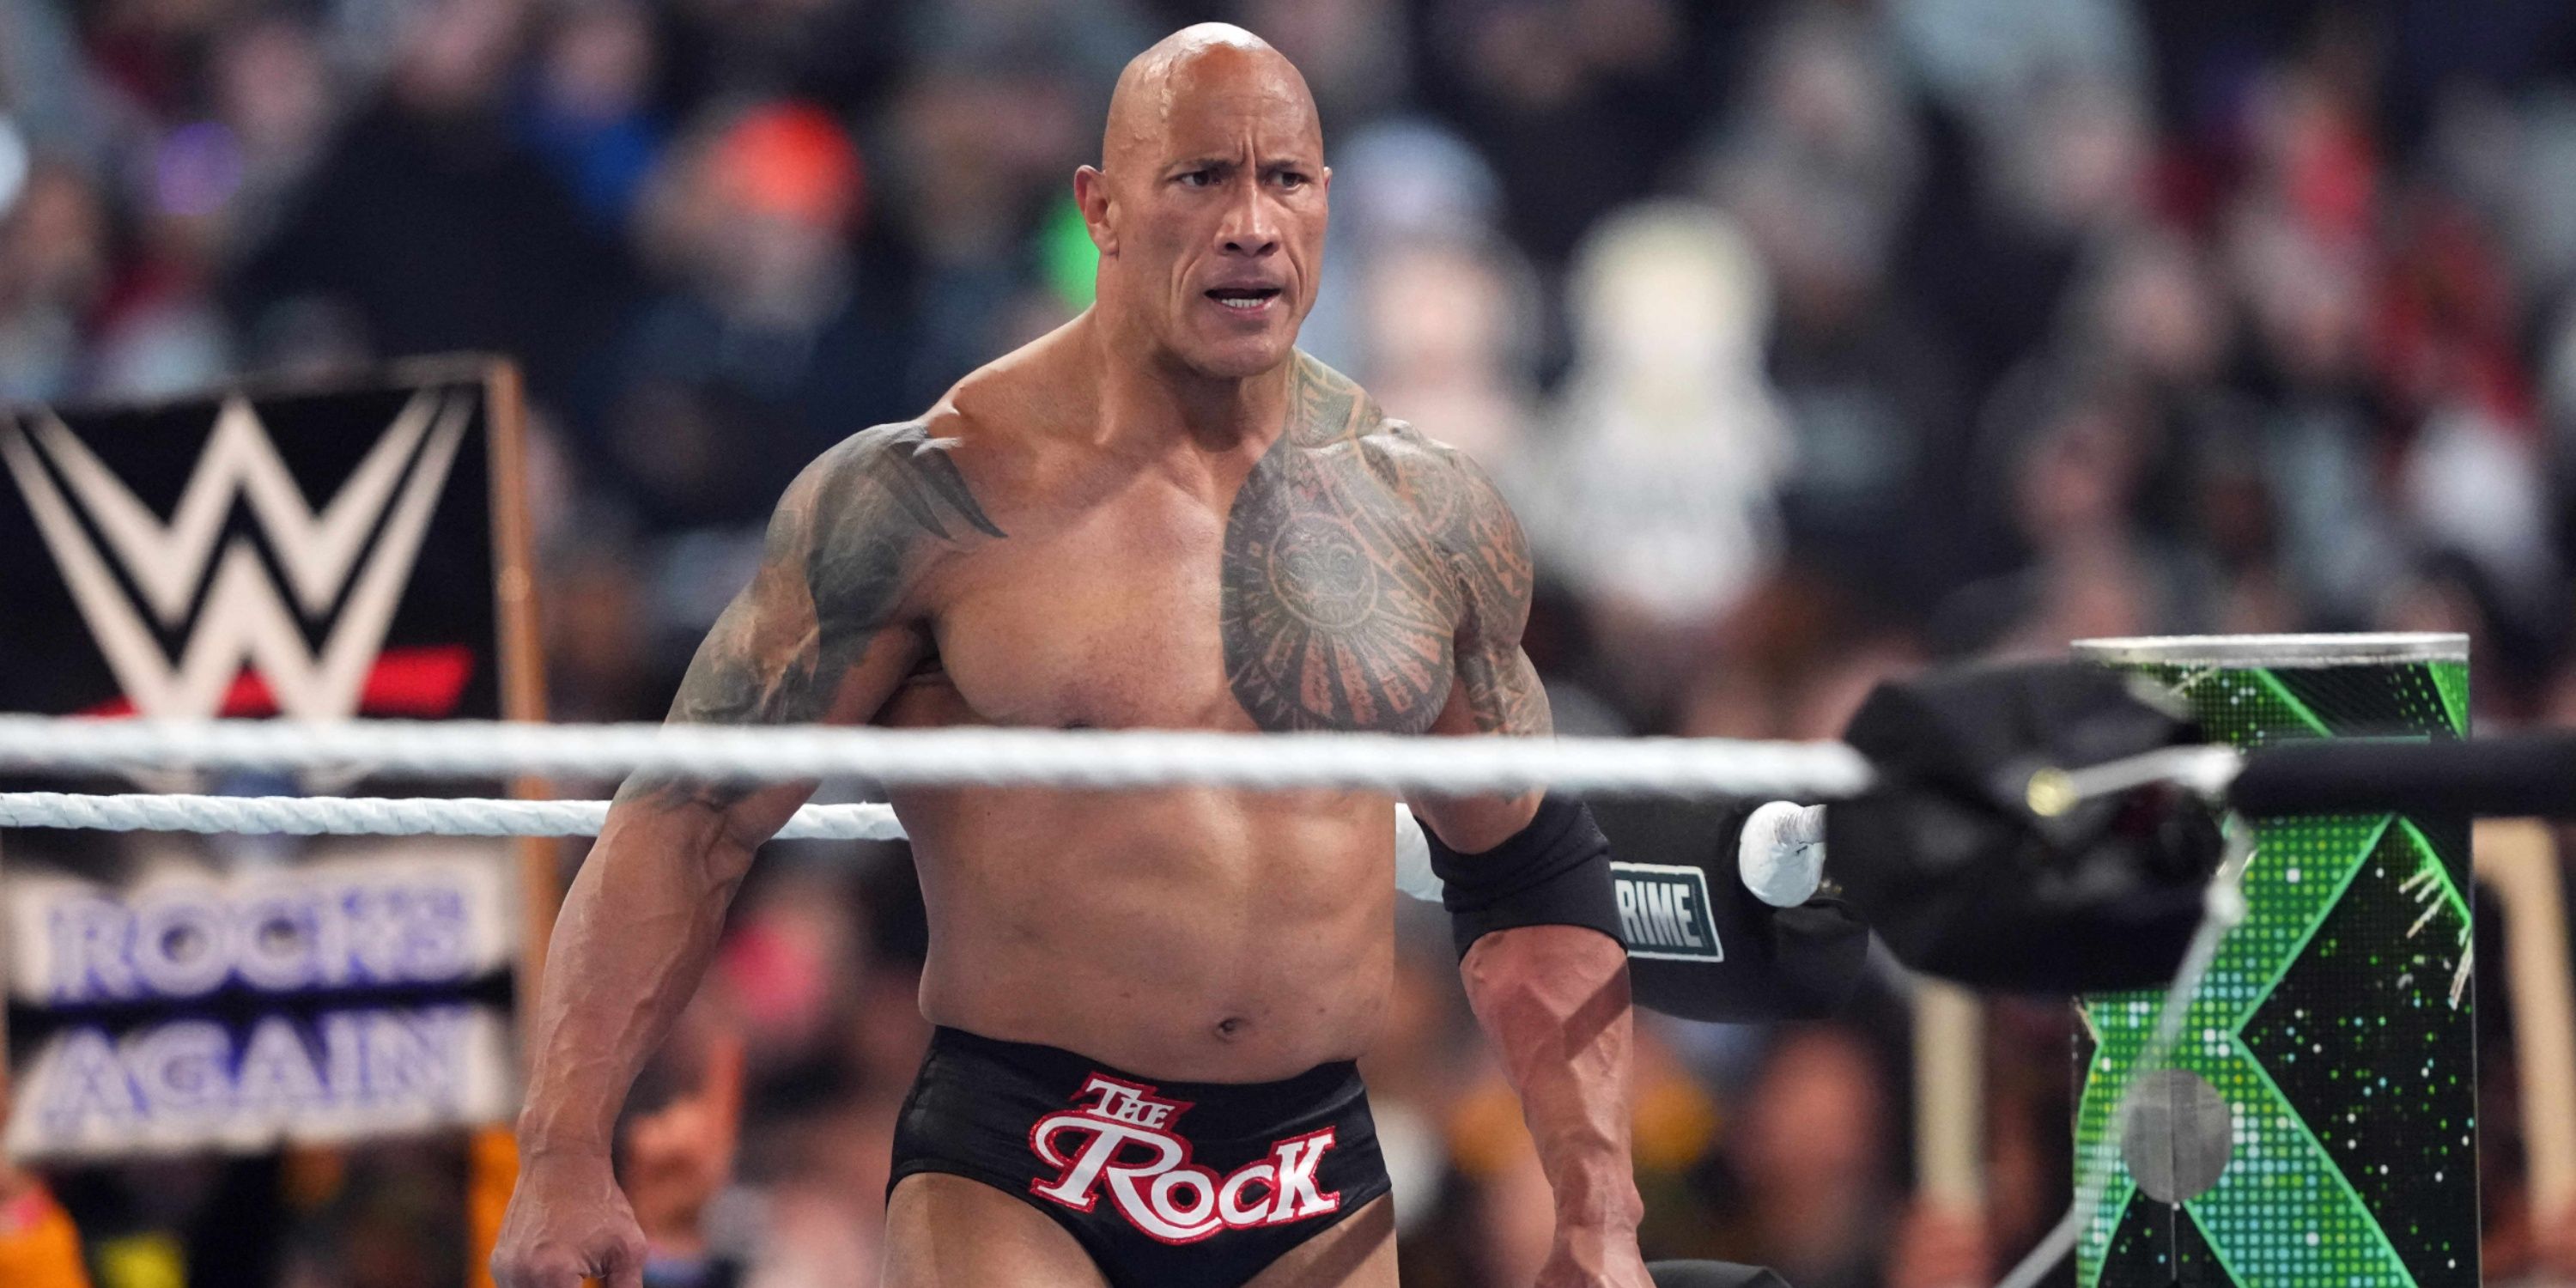 The Rock in the ring at WrestleMania 40